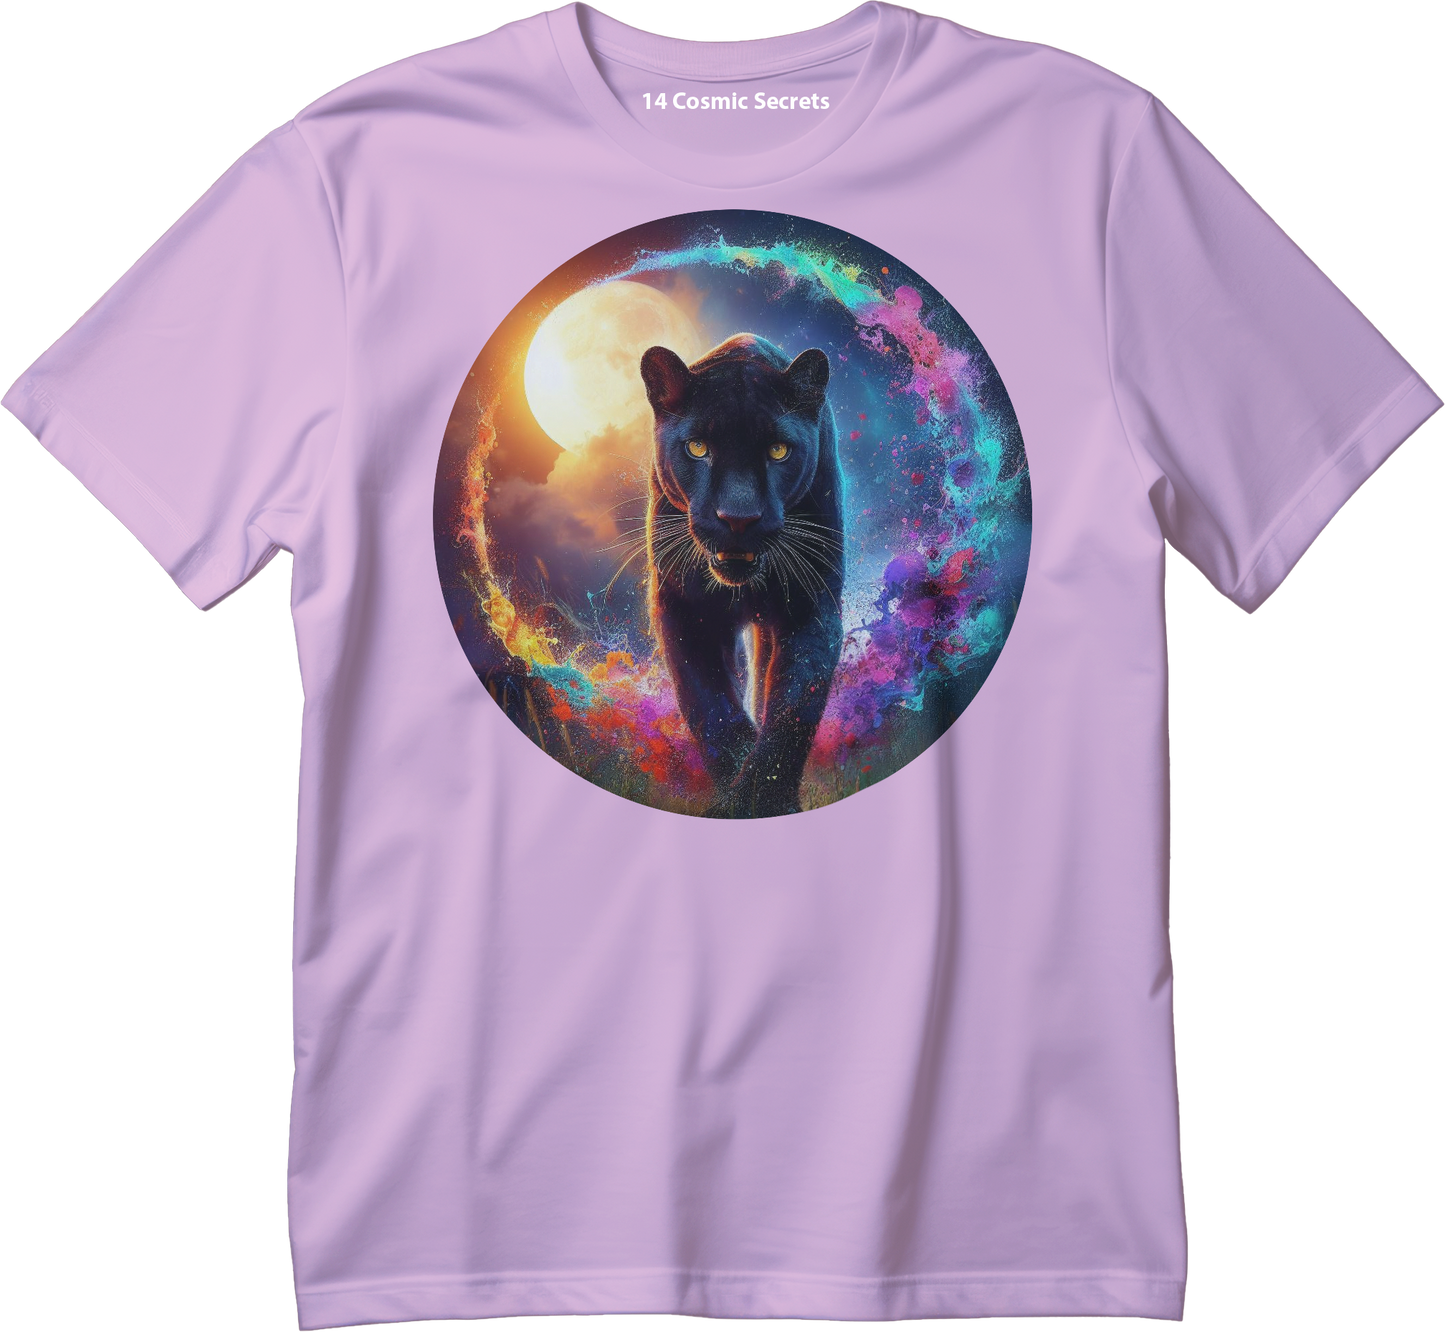 The Bold Black Panther  Graphic Printed T-Shirt  Cotton T-Shirt Magnificence of India T-Shirt